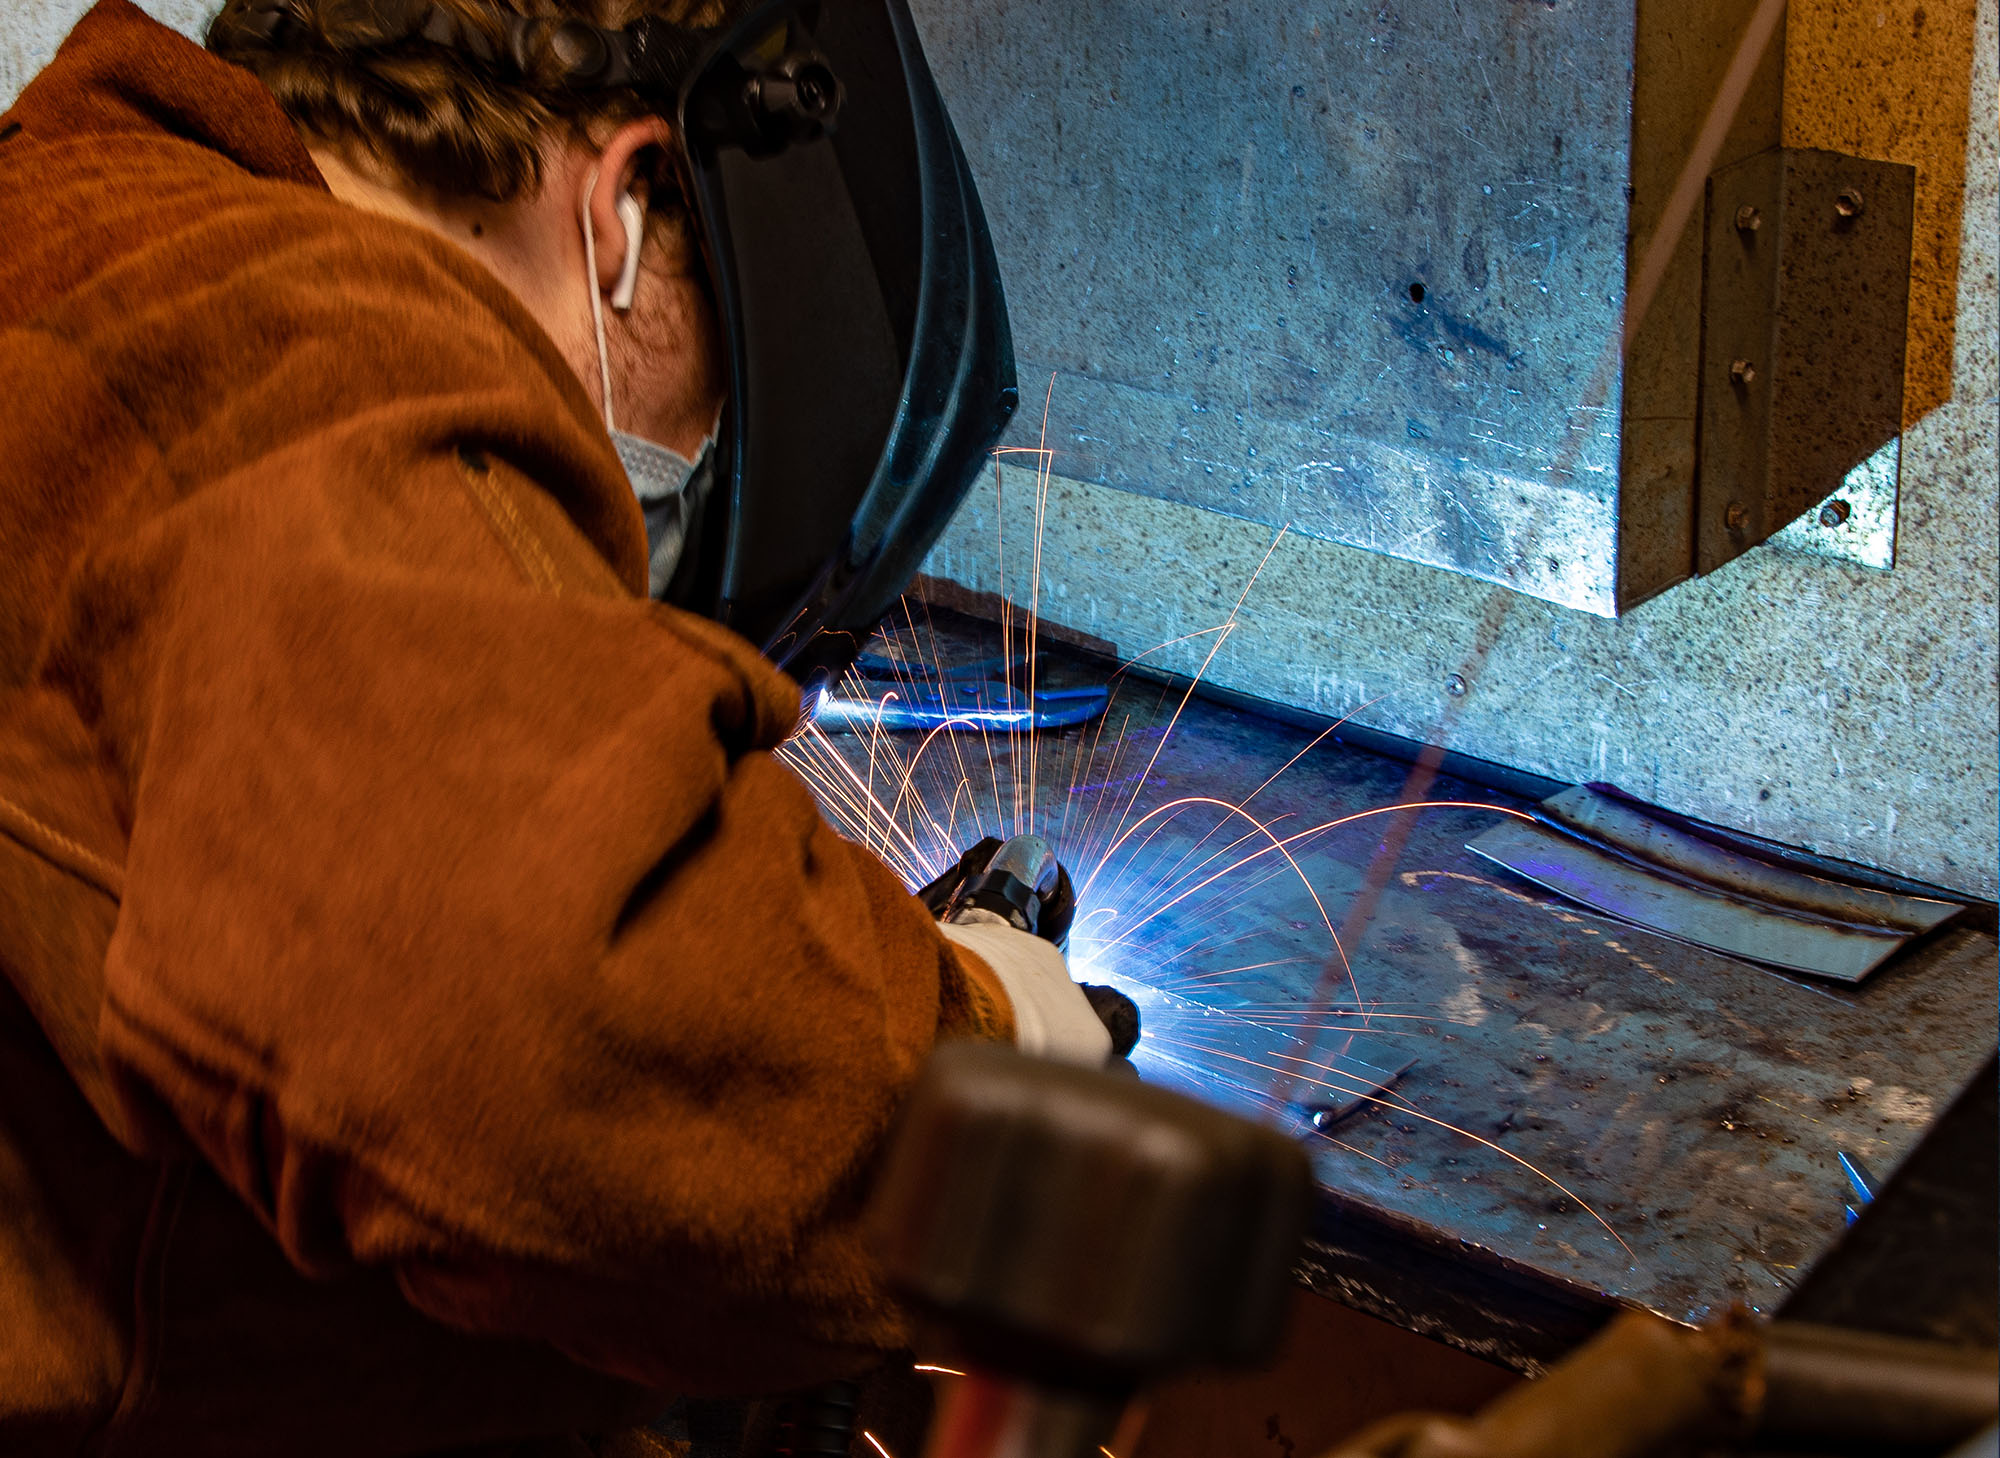 Welding Technology student working on a project wearing safety equipment